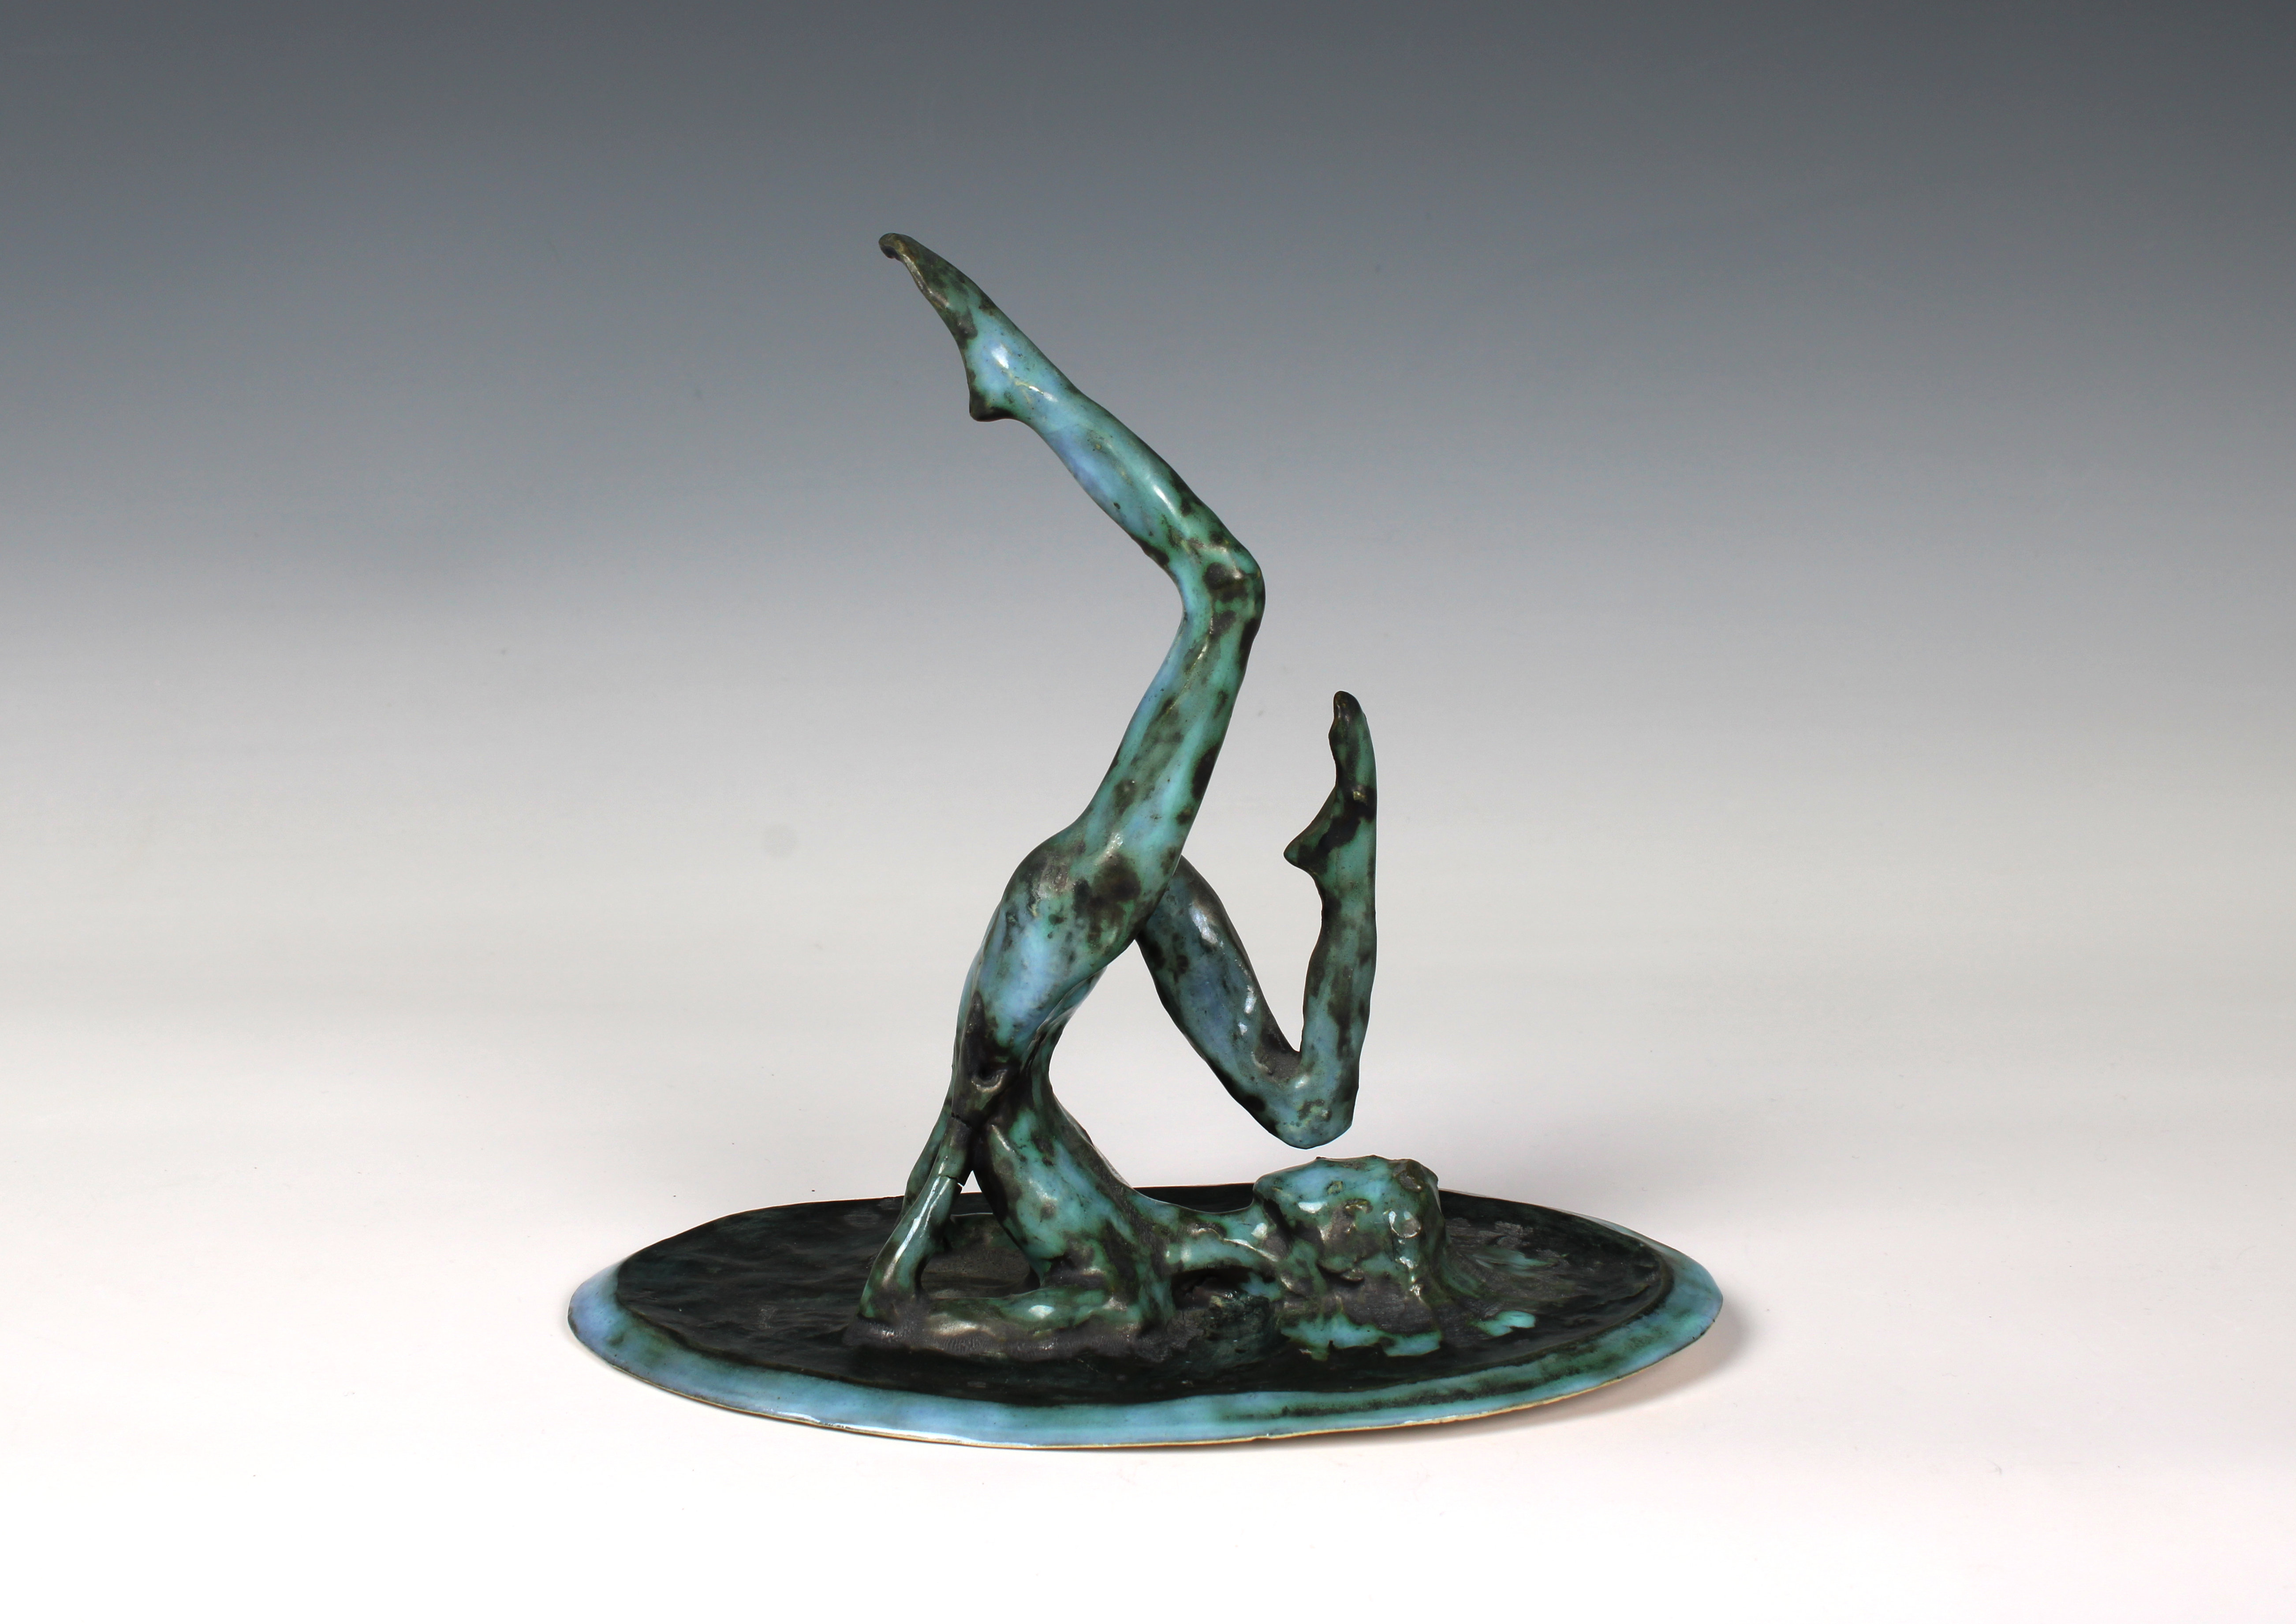 Elizabeth Ann Macphail (1939-89) glazed sculpture featuring a stylised figure doing exercise - Image 6 of 7